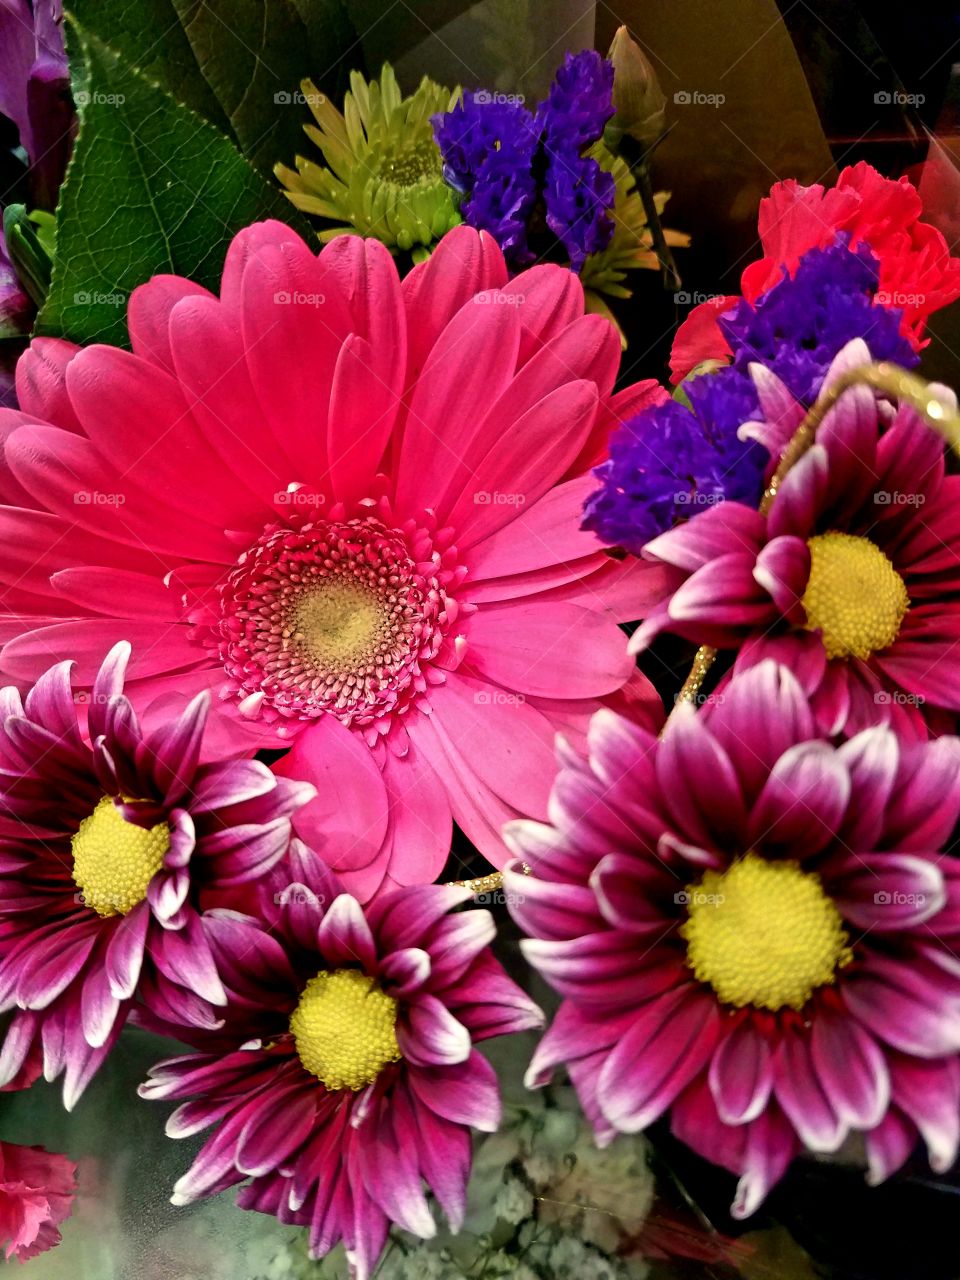 A close up of colorful pink and purple flowers against a dark green background